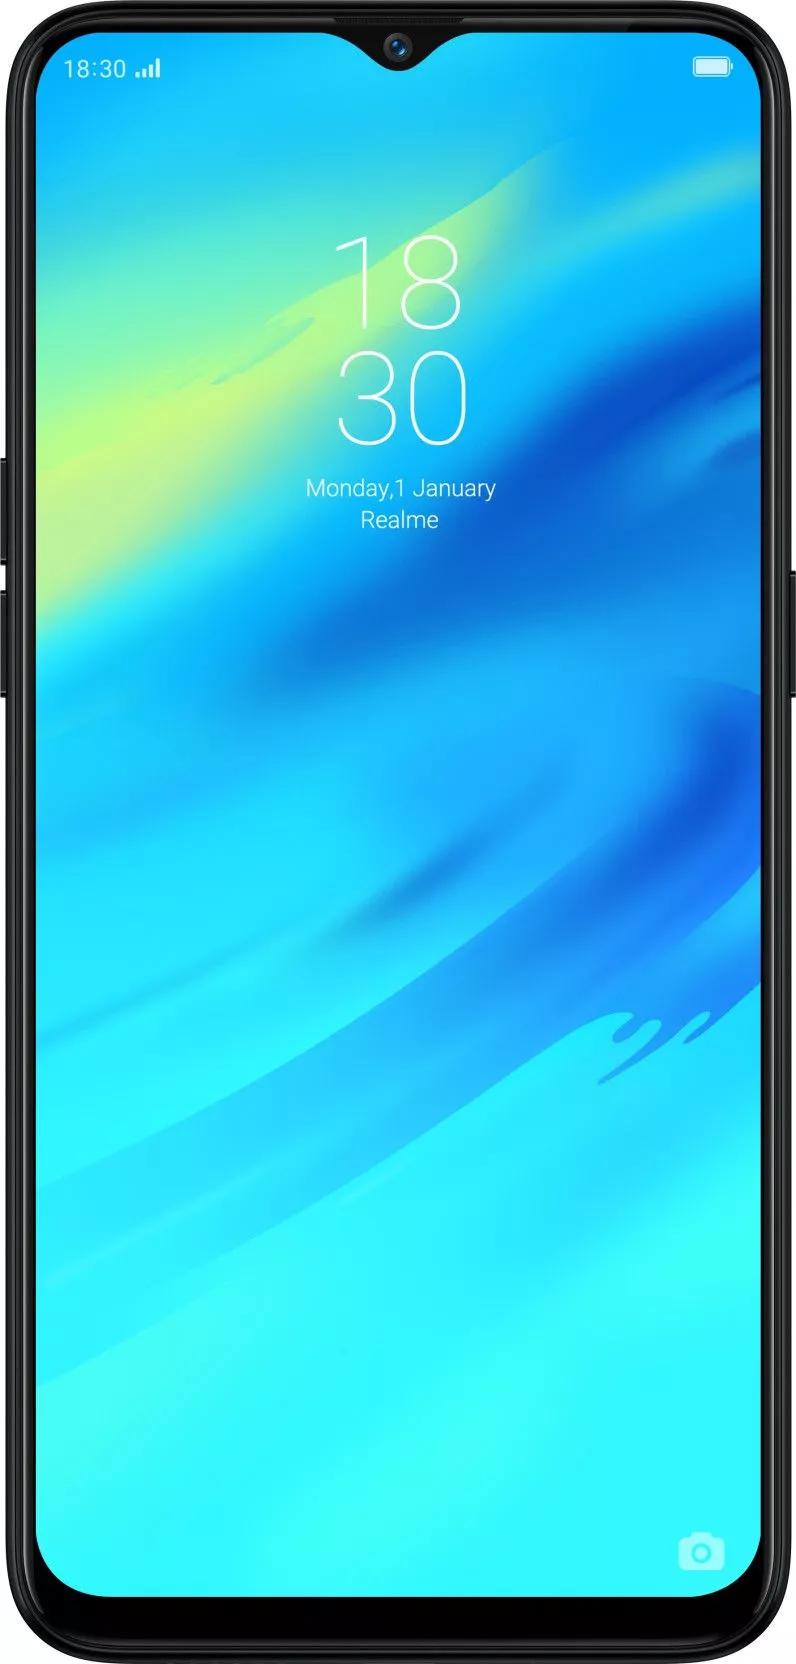 Realme pro photos images and wallpapers